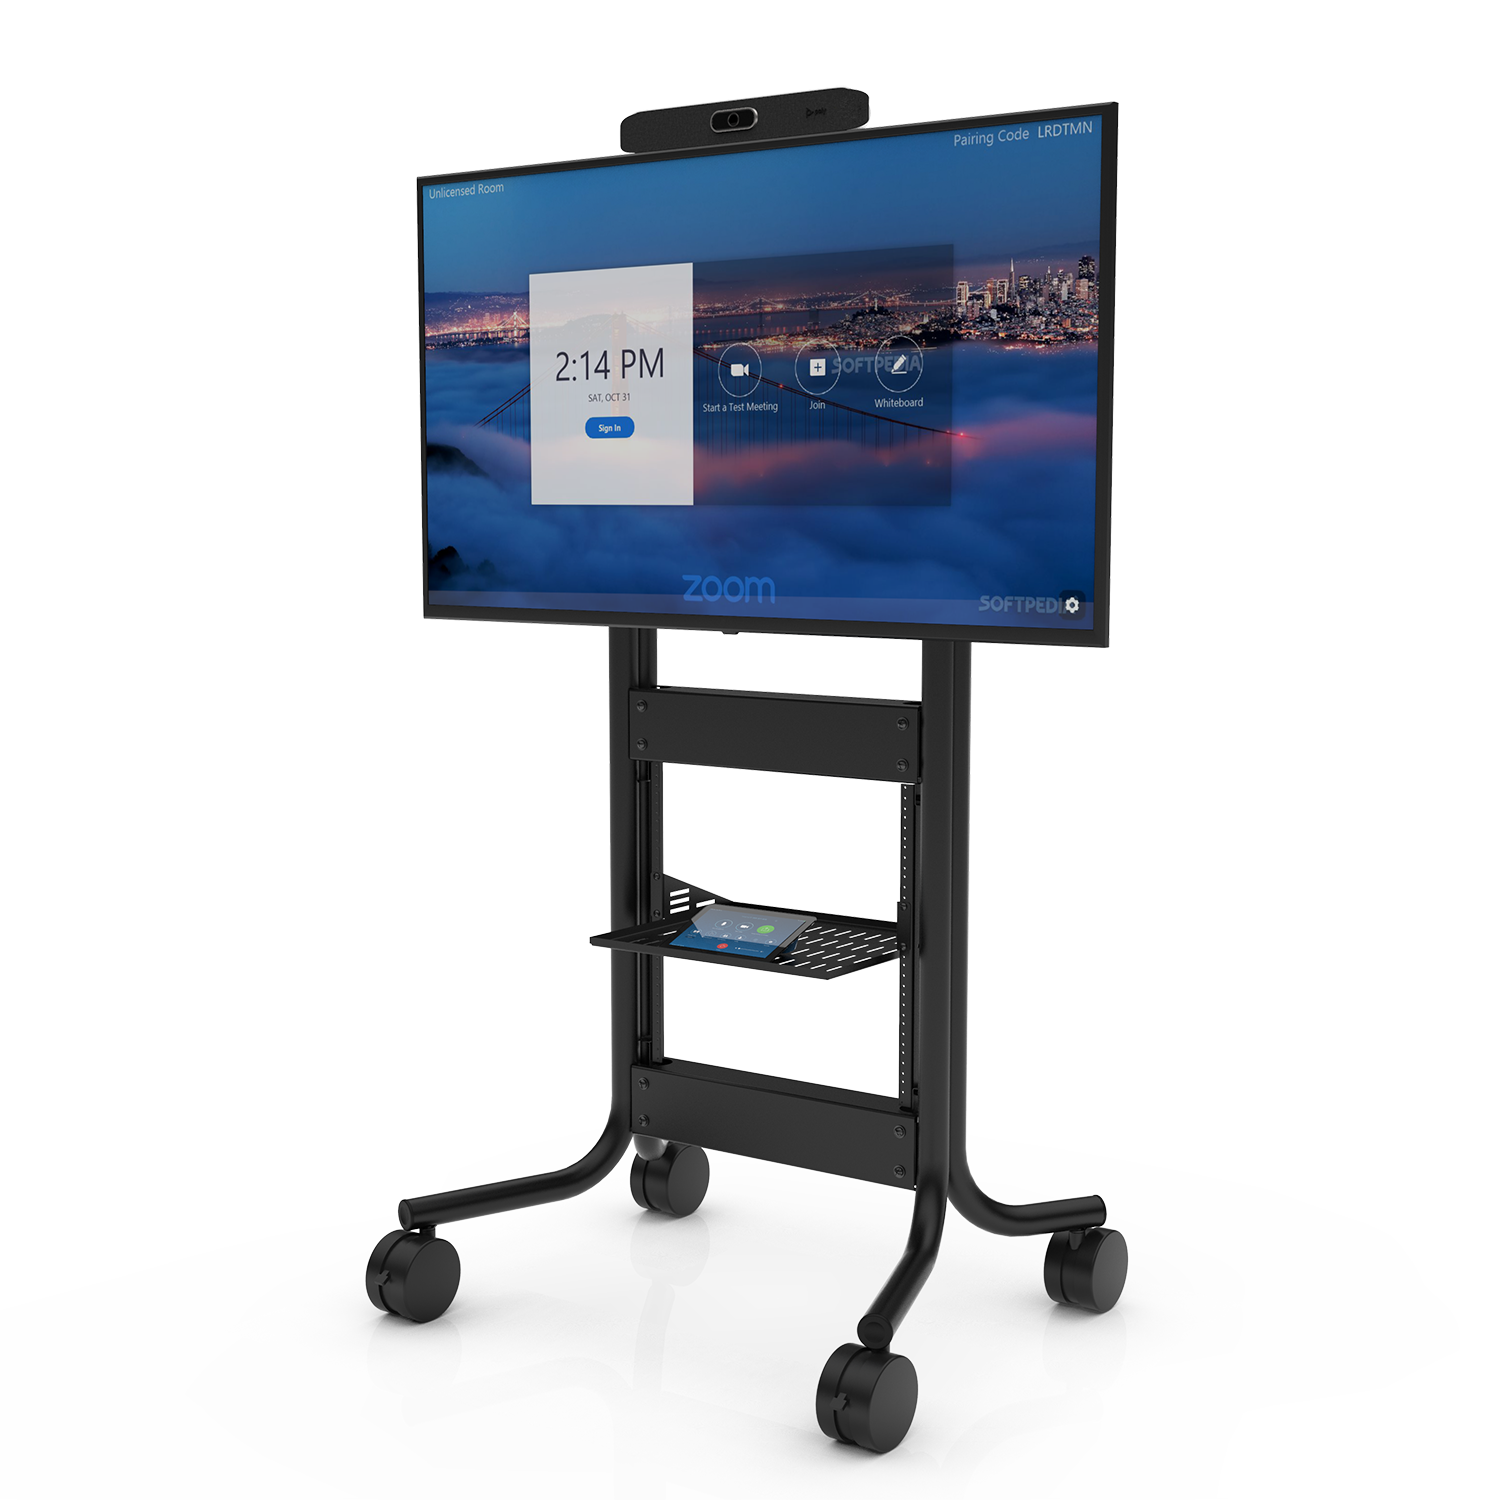 RPS-500S Mobile Cart with a single display and Poly camera, front angled view